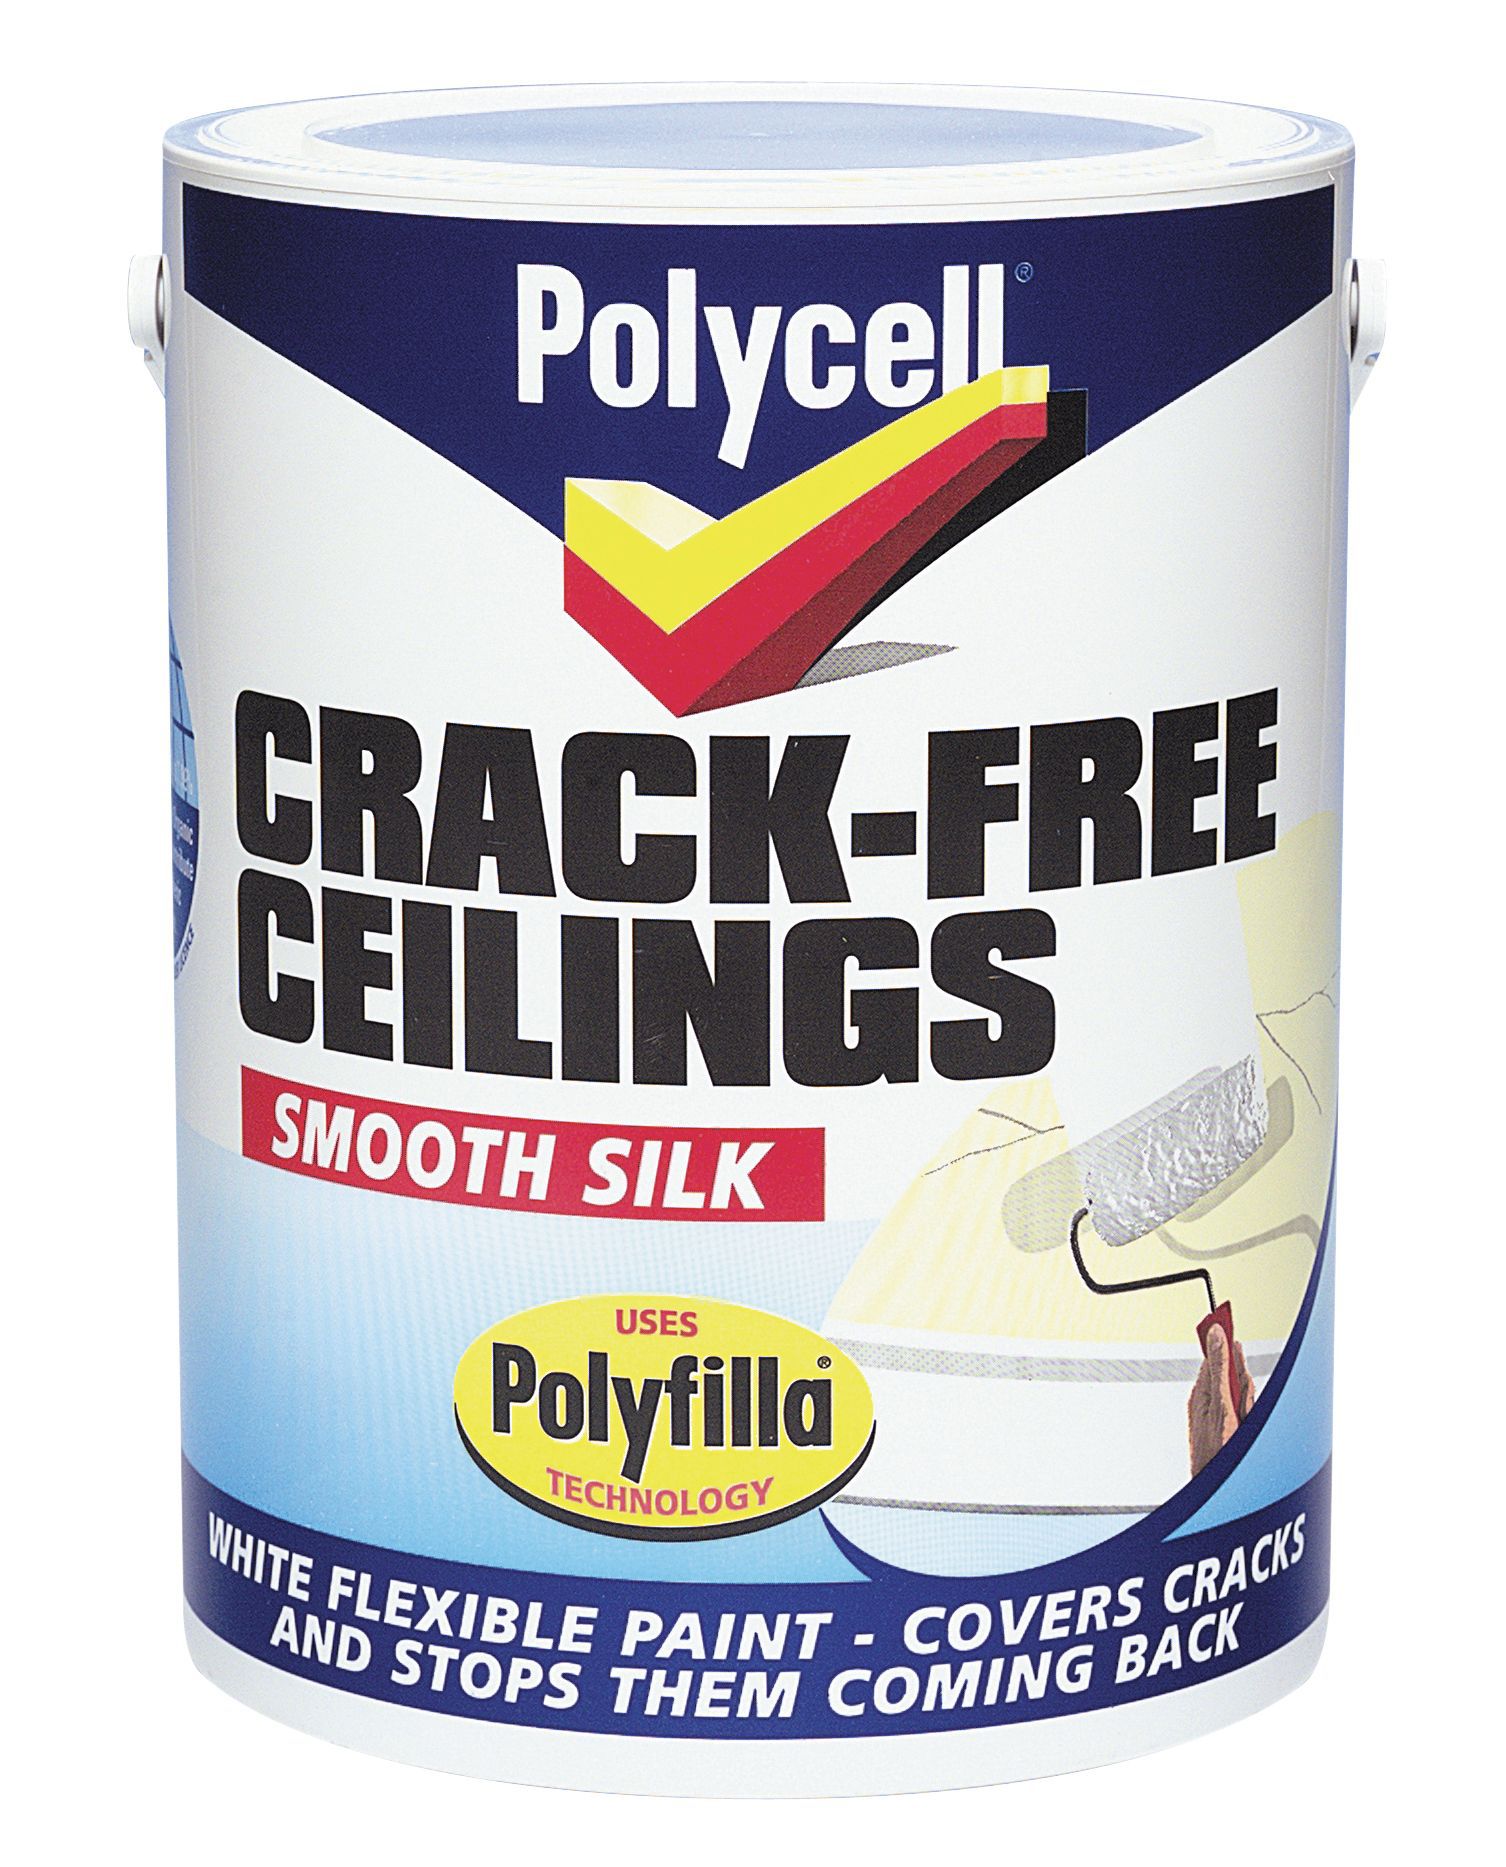 Polycell Crack Free Ceilings Review Times